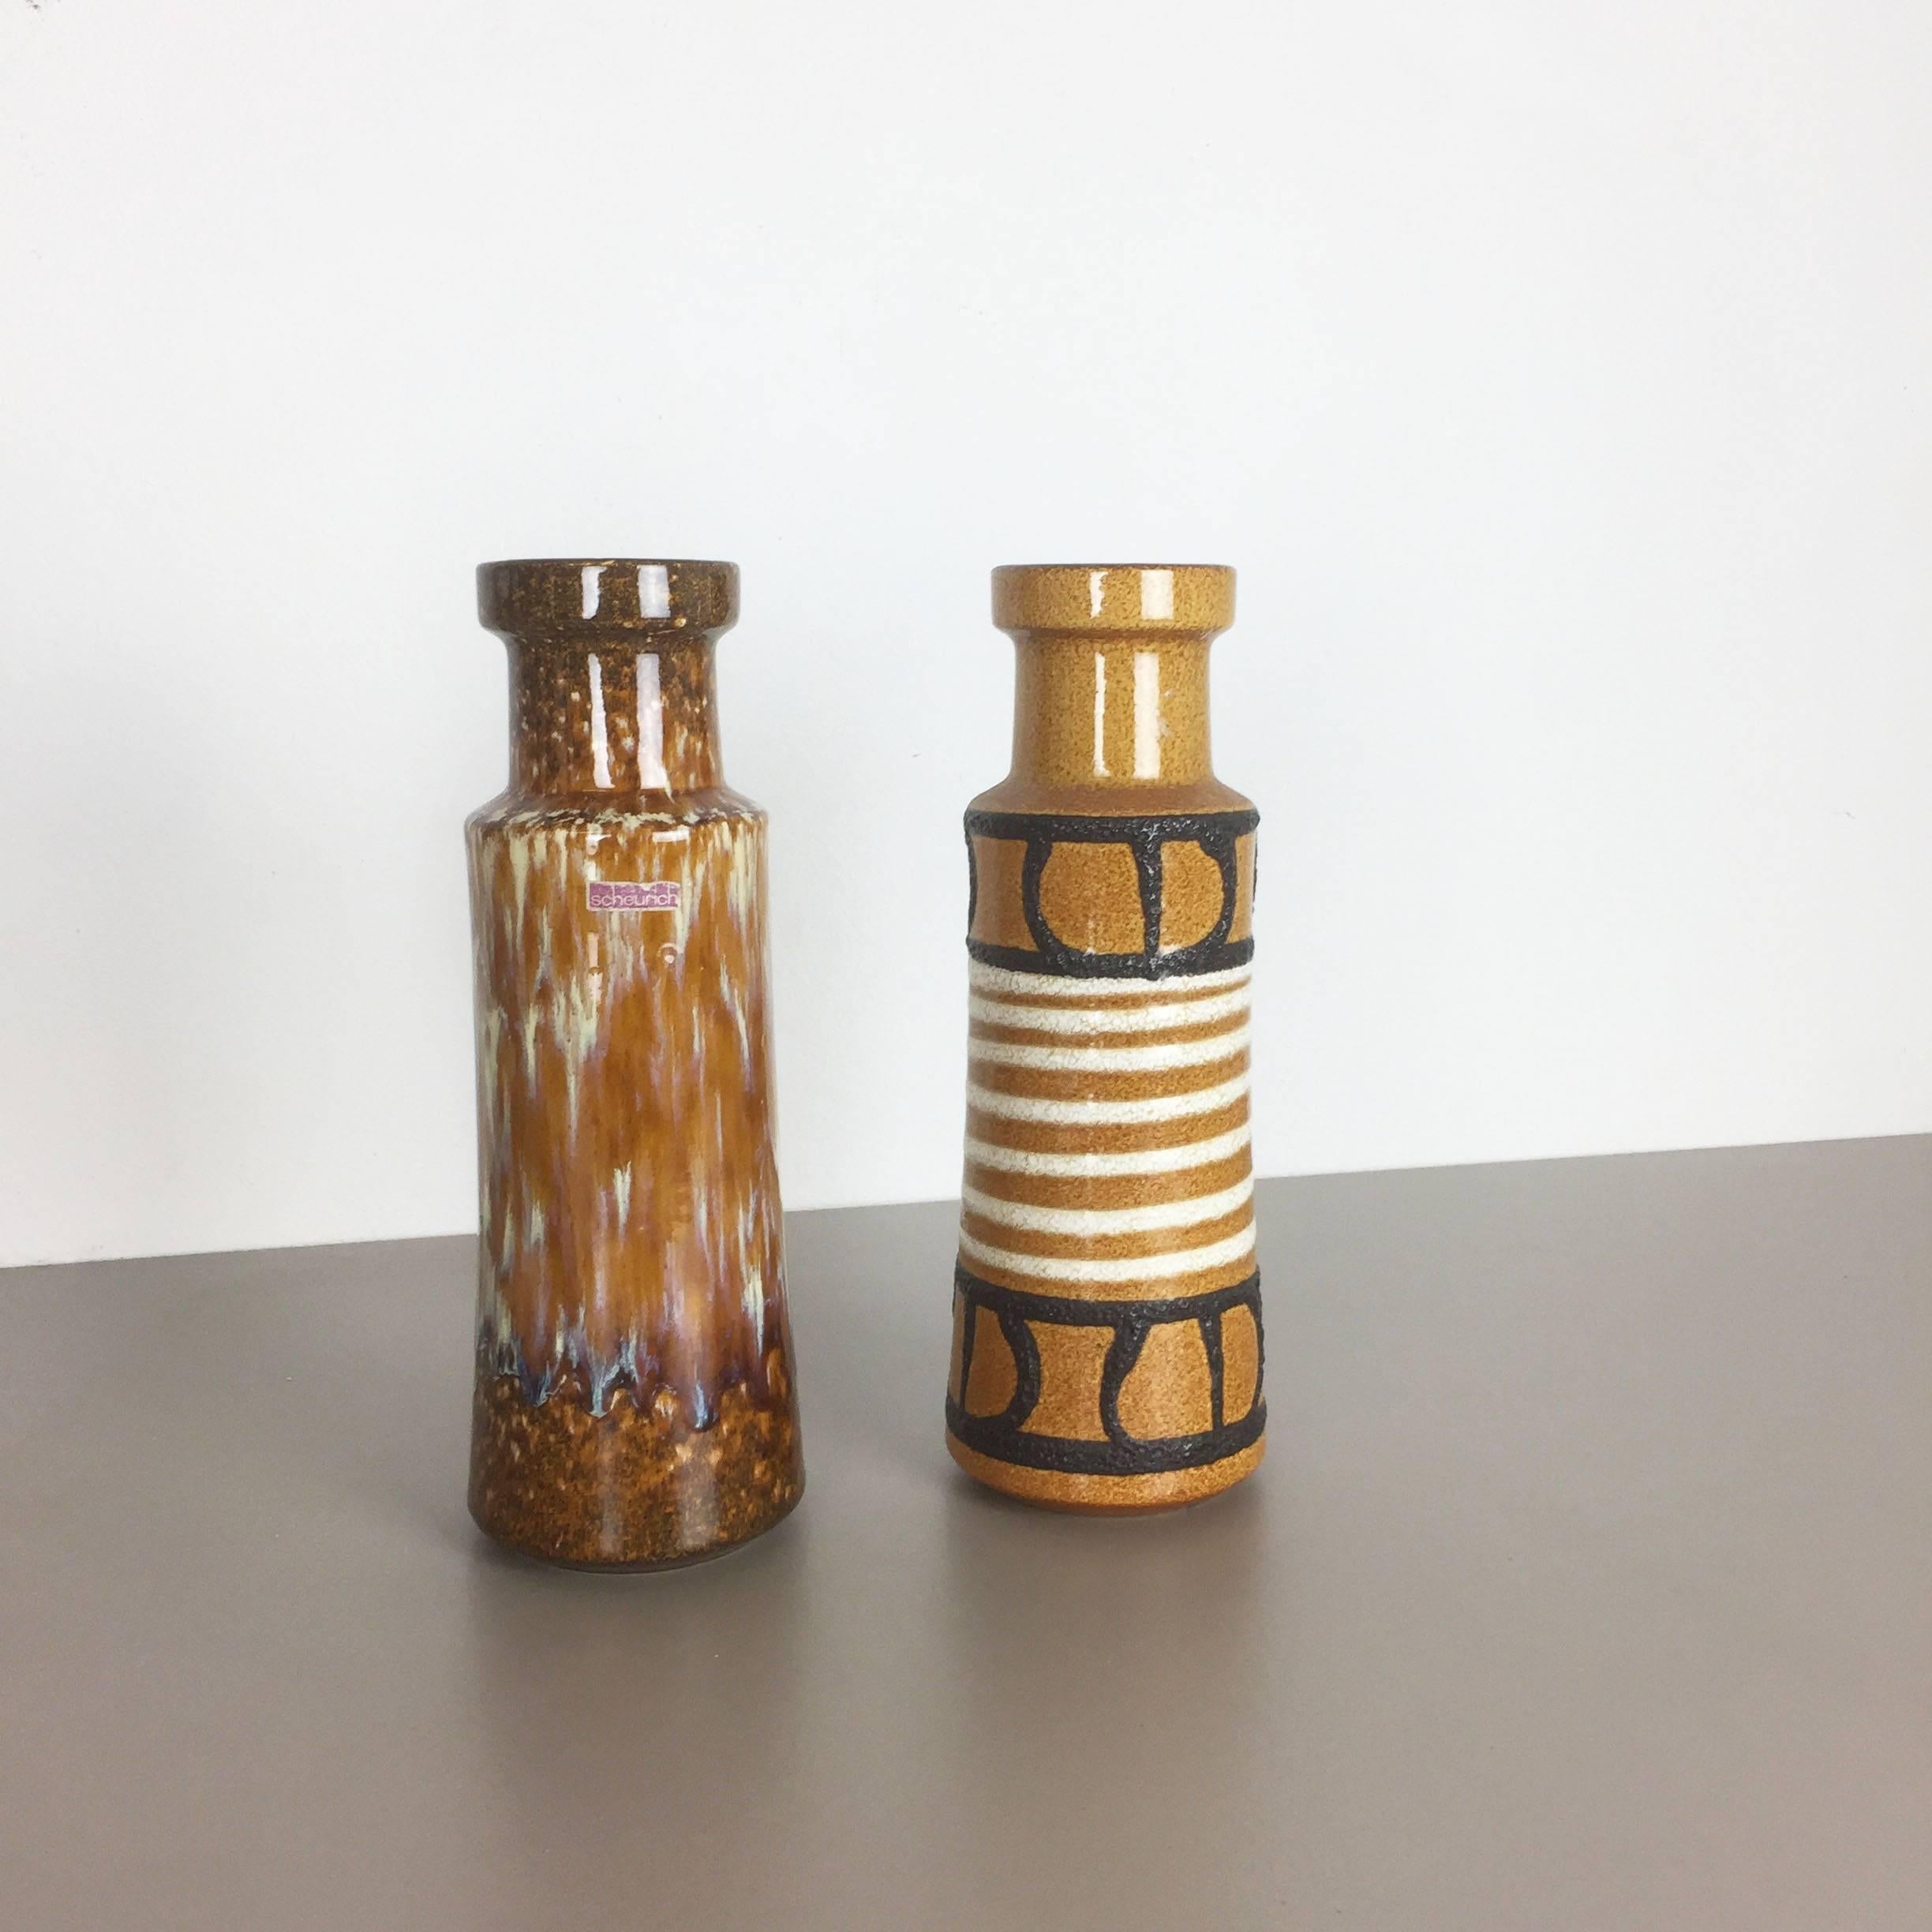 Article:

set of two Fat Lava art vases


Producer:

Scheurich, Germany


Design:

Nr. 205 32



Decade:

1970s


Description:

This original vintage Vase was produced in the 1970s in Germany. It is made of porcelain in Fat